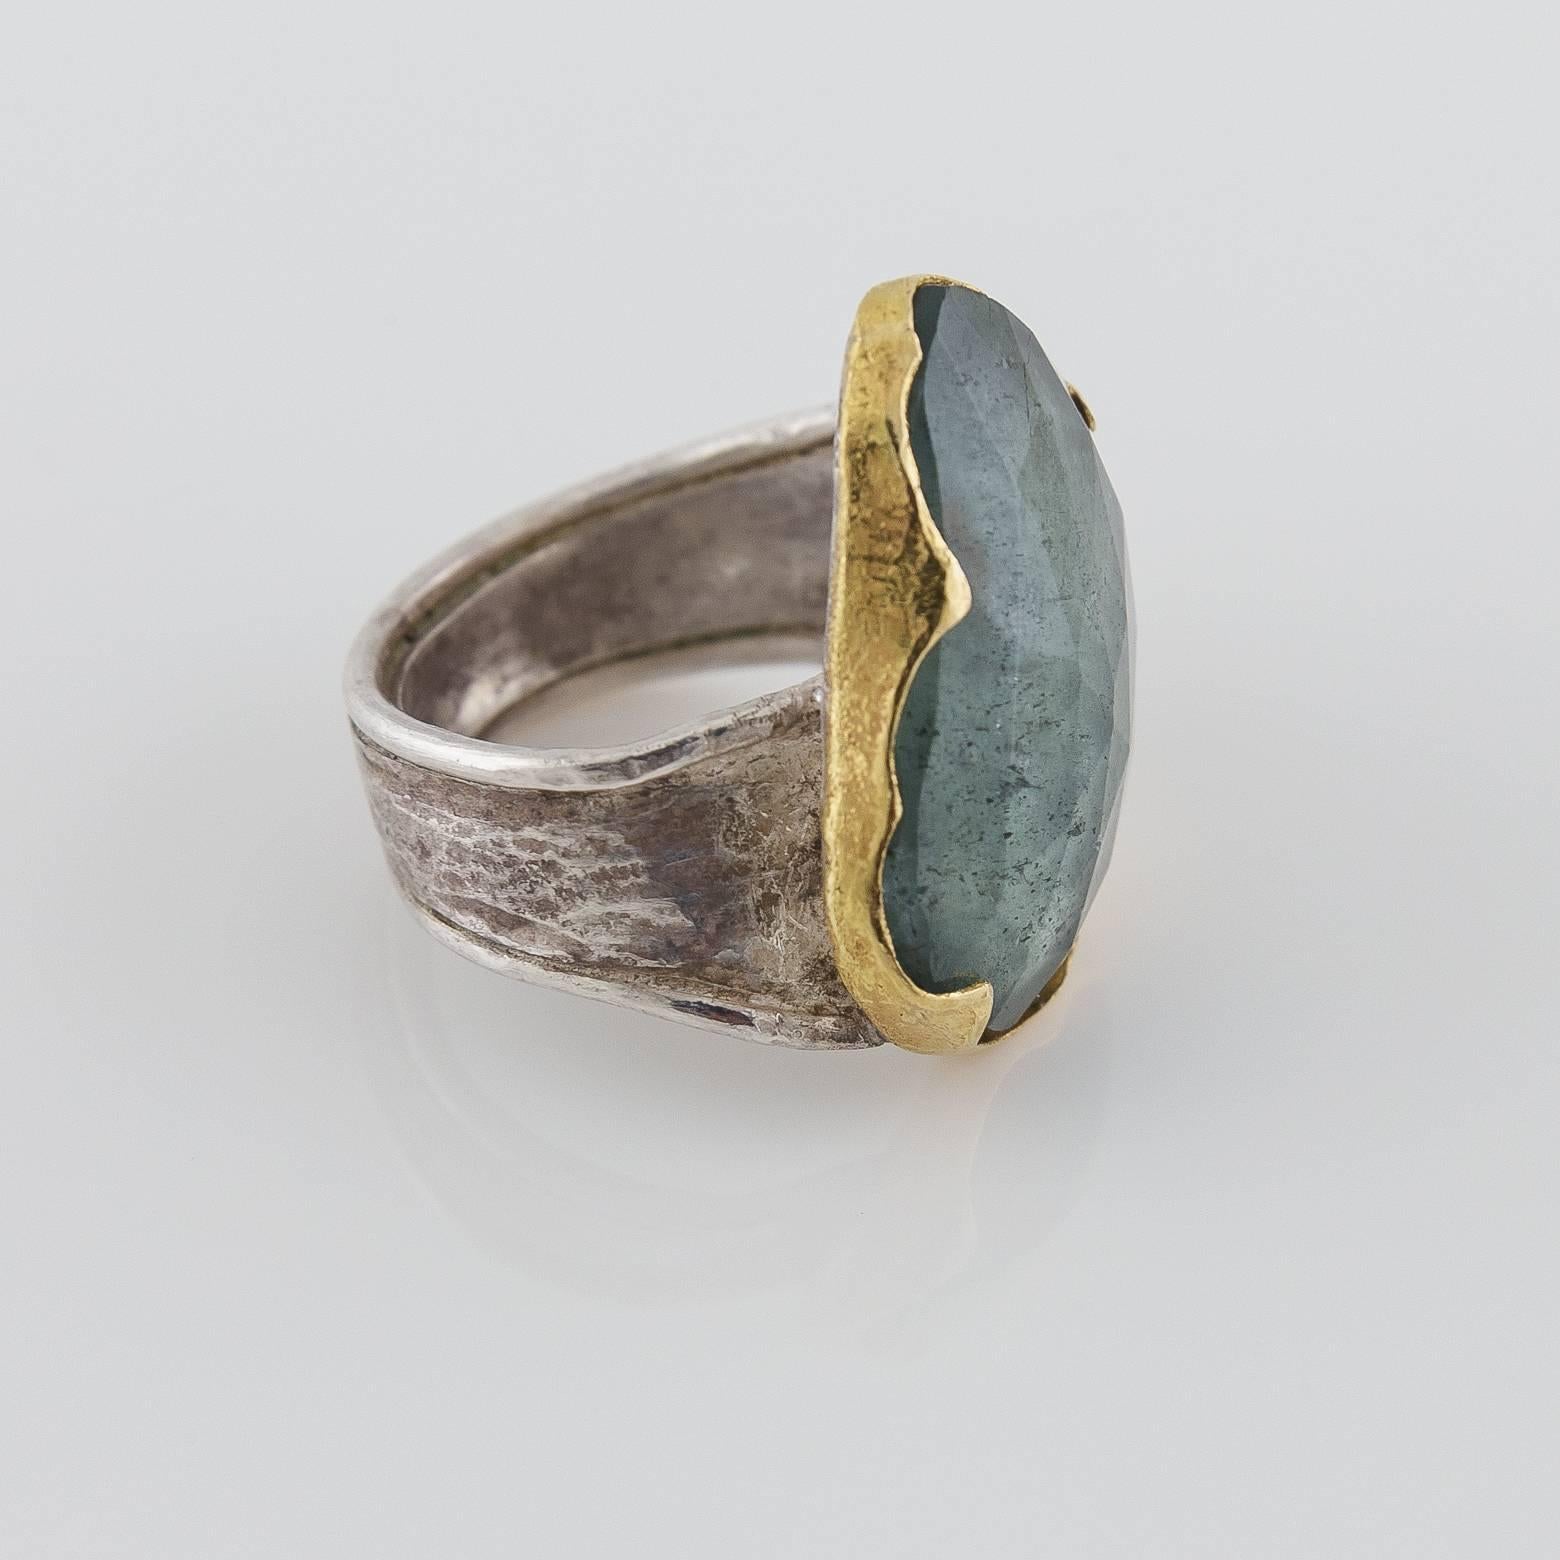 This beautiful moss aquamarine two-toned ring was handmade in the San Francisco Bay Area. It is both sterling silver and 18K yellow gold. It has an ancient and artistic feel to it and the stone is absolutely unique and gorgeous with a rare pinkish